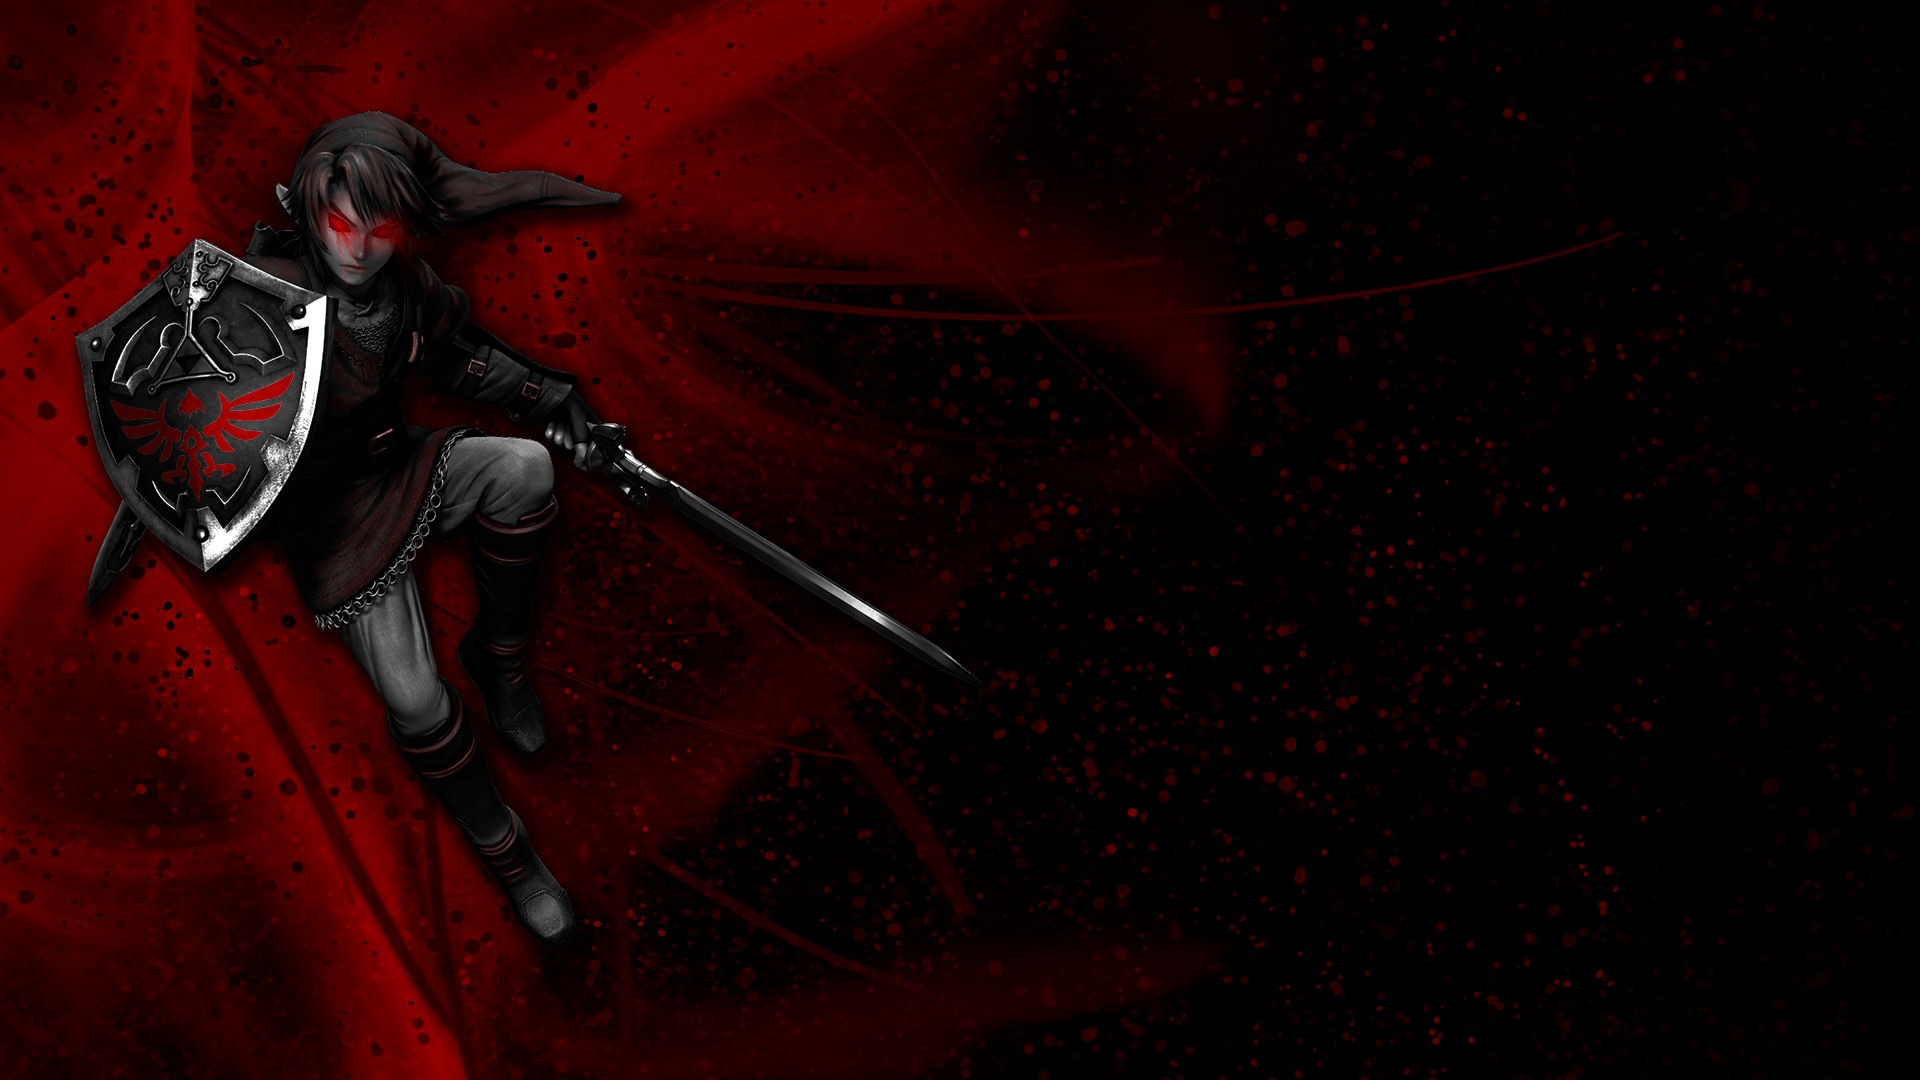 A new Dark Link wallpaper I created for my fellow LoZ fans